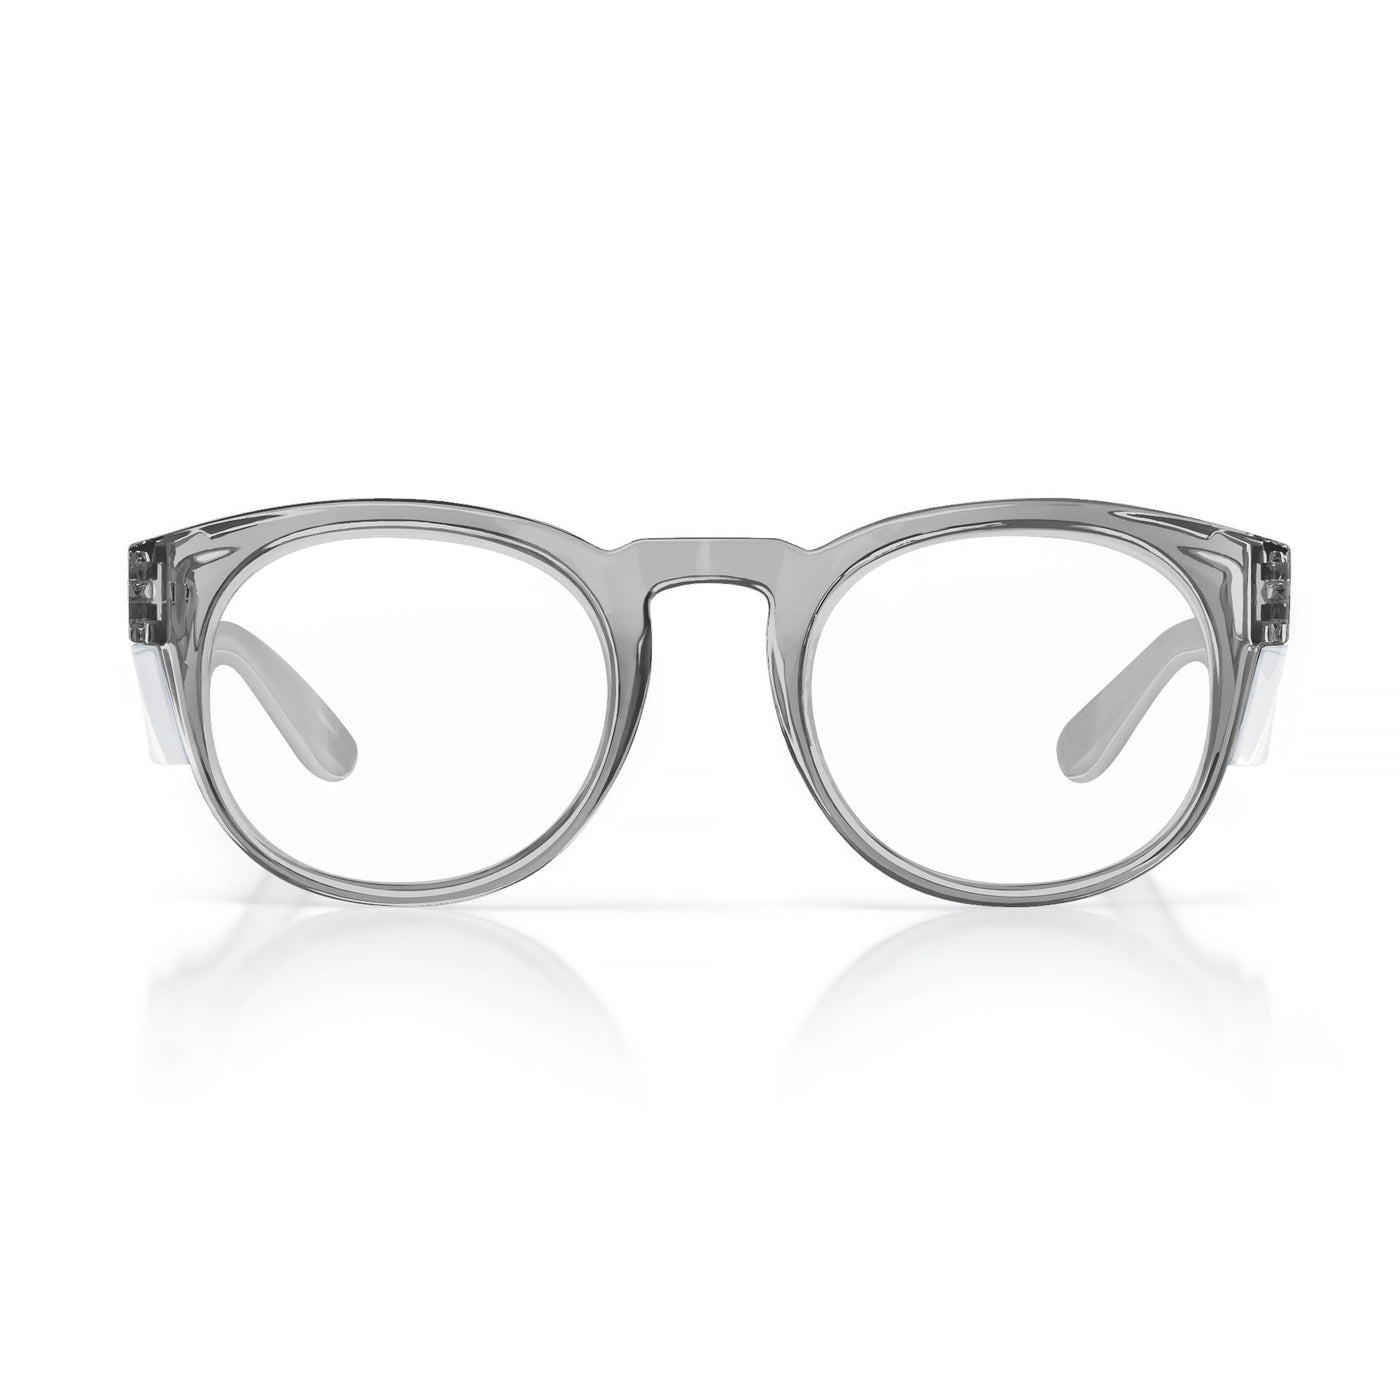 Cruisers Graphite Frame Clear Lens